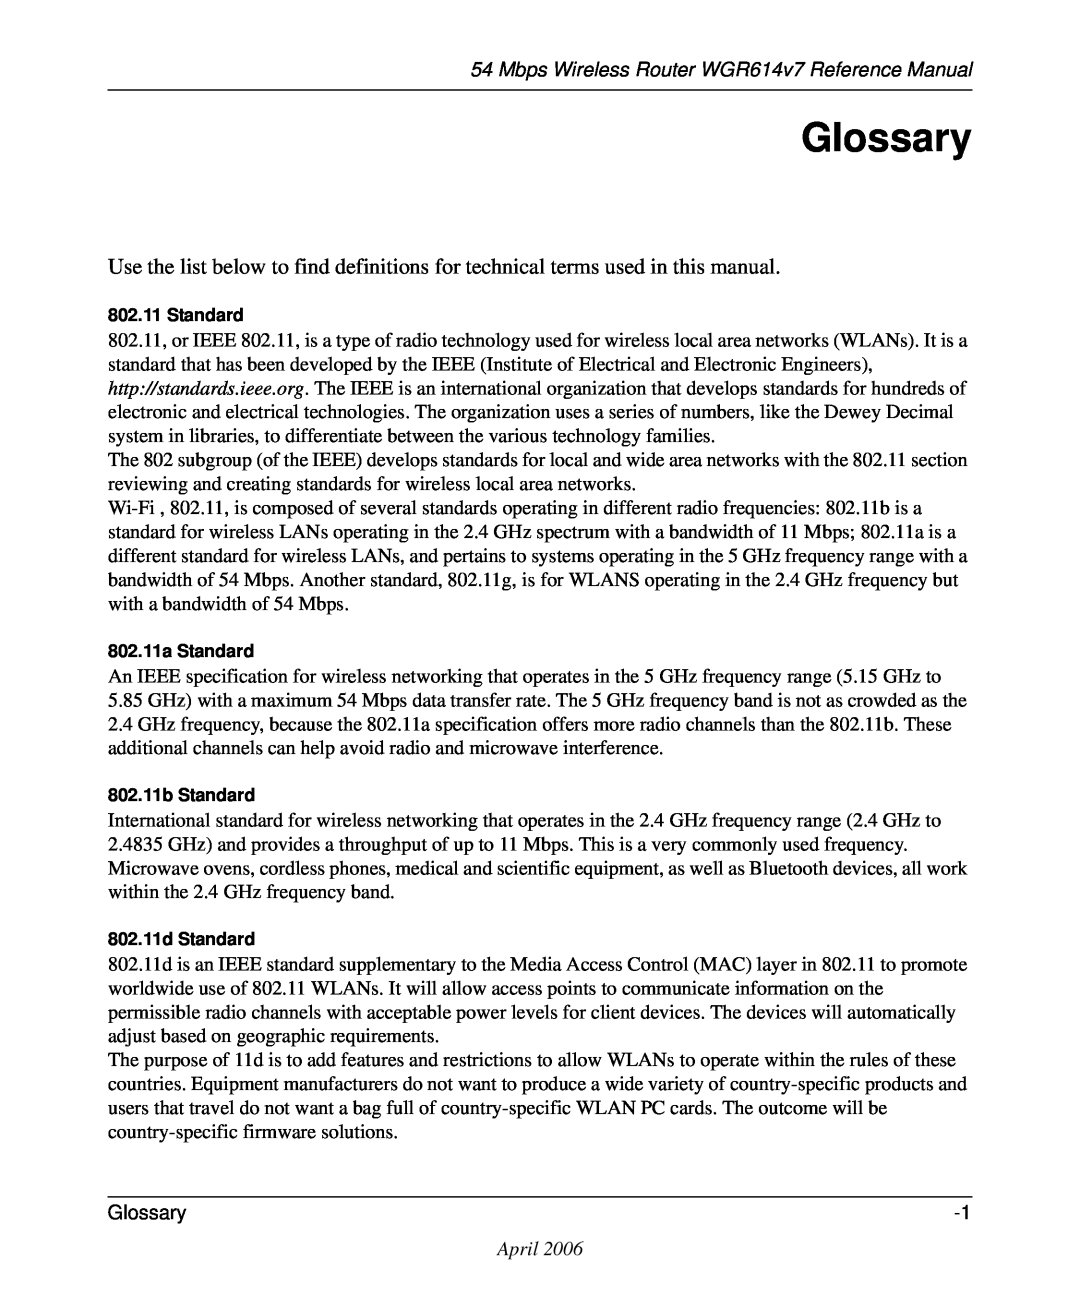 NETGEAR manual Glossary, Mbps Wireless Router WGR614v7 Reference Manual, April 